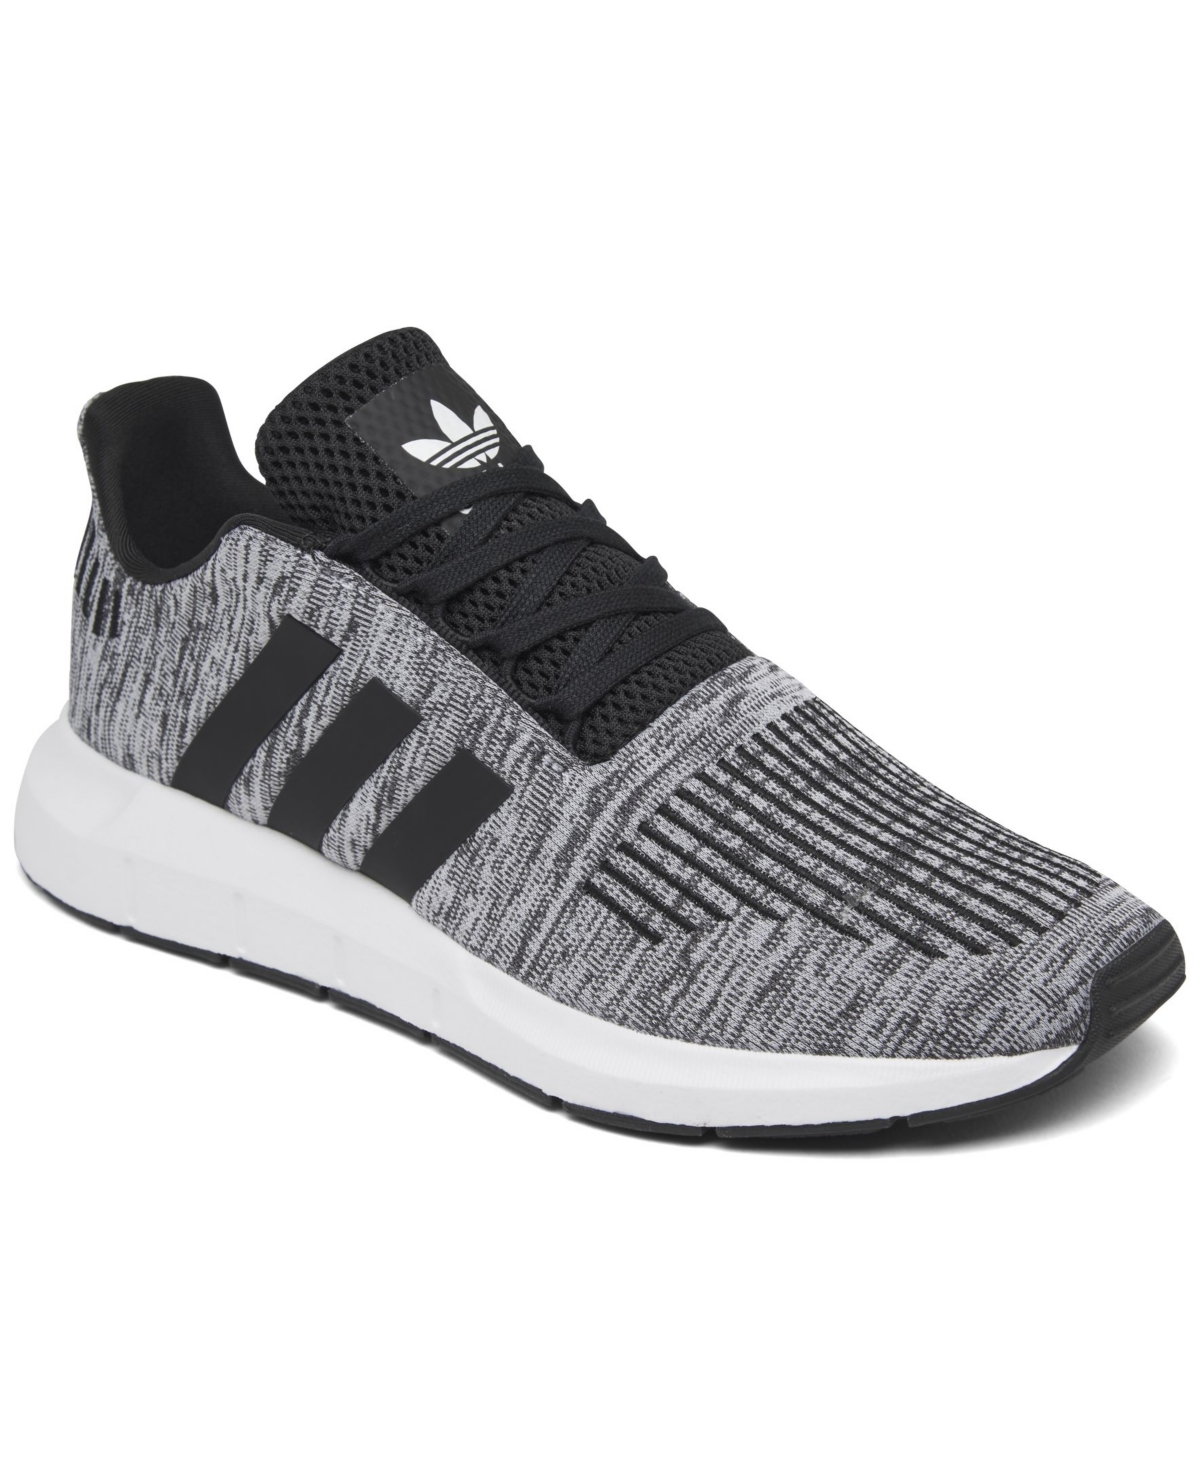 adidas Big Boys and Girls Originals Swift Run Casual Sneakers from Finish Line